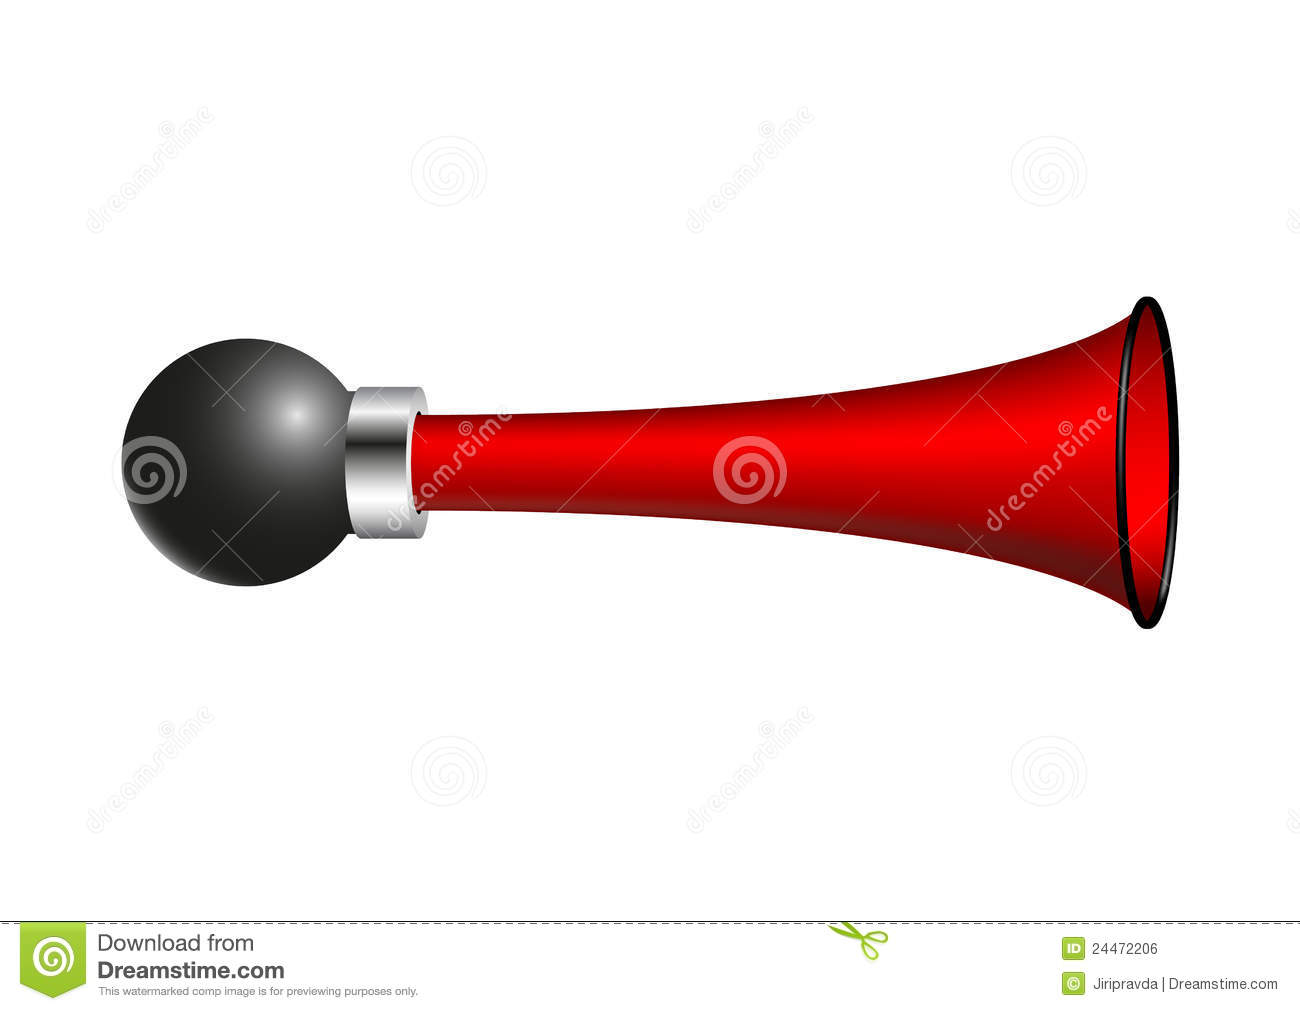 Vintage Bicycle Air Horn Royalty Free Stock Image   Image  24472206